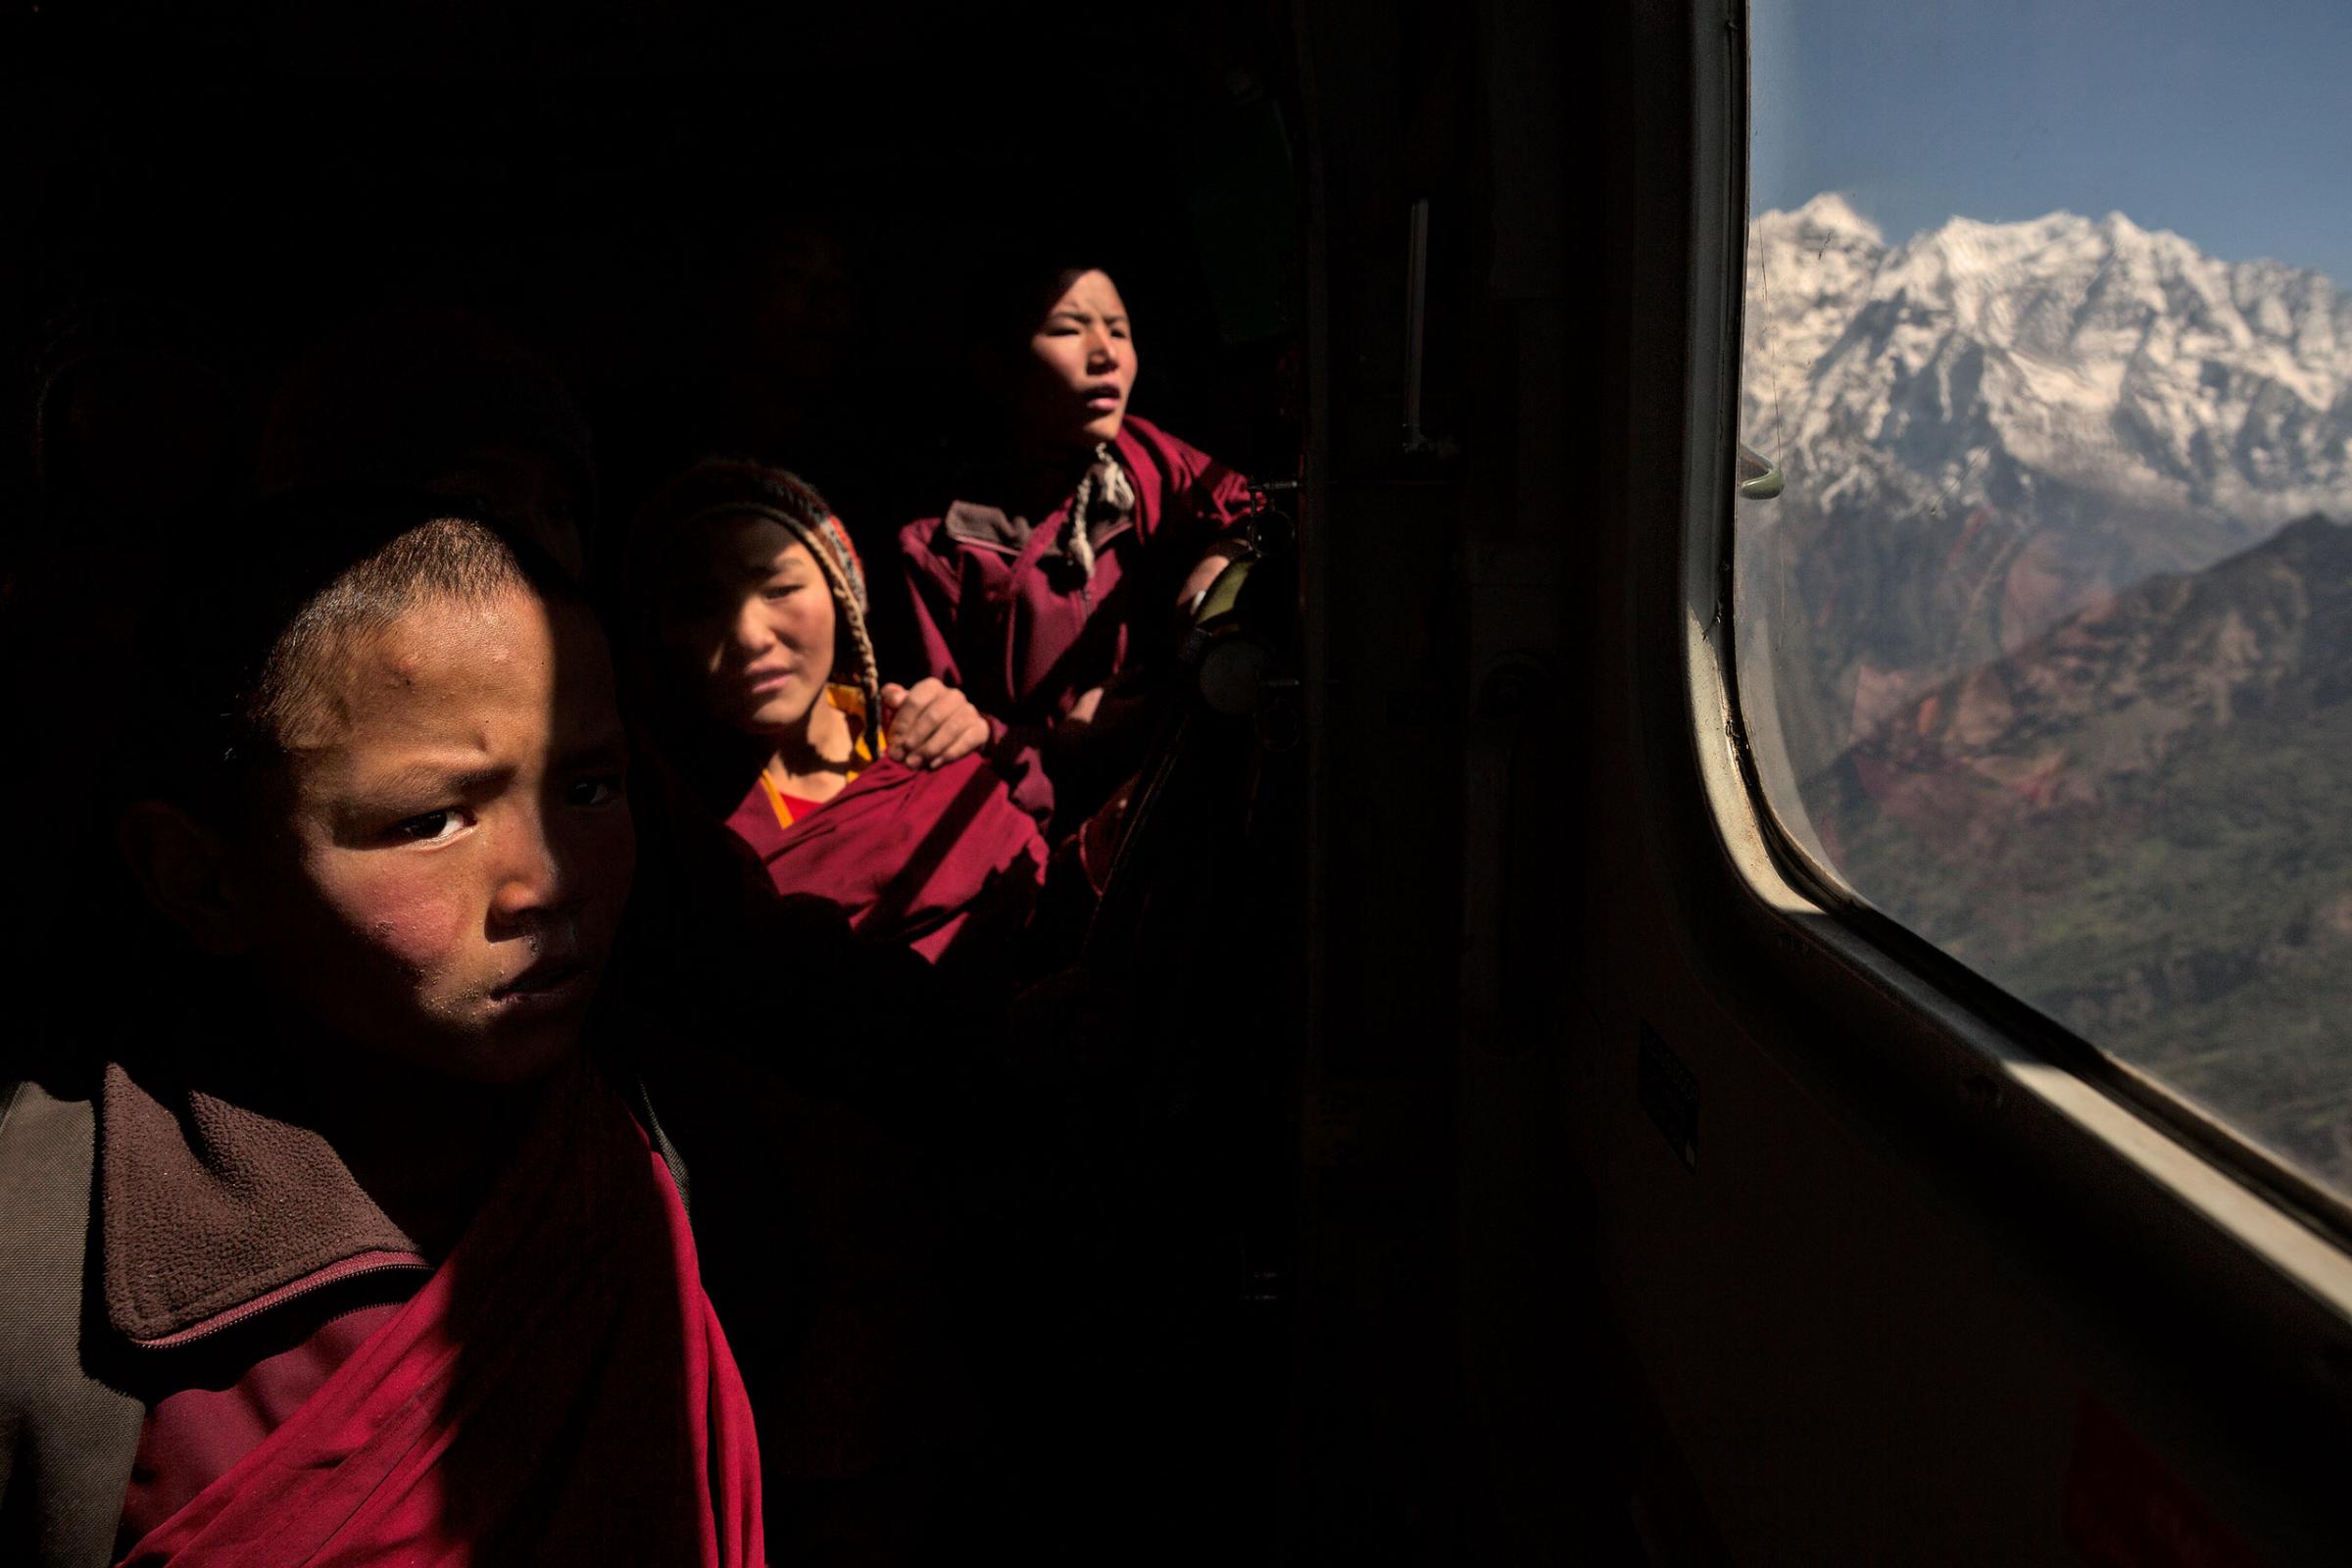 Nepal earthquake. Young Buddhist monks from Hinang Gompa (monastery) in the village of Lhi in Gorkha district in the Annapurna Range of the Himalayas were transported by Indian Army helicopter to Pokhara because the monastery was damaged in the earthquake. A boy was injured in the mountain village of Dhunchet and with his father was evacuated  by Indian Army helicopter. Mountain villages outside Pokhara that were destroyed. Food drops by Indian Army helicopters.  by James Nachtwey